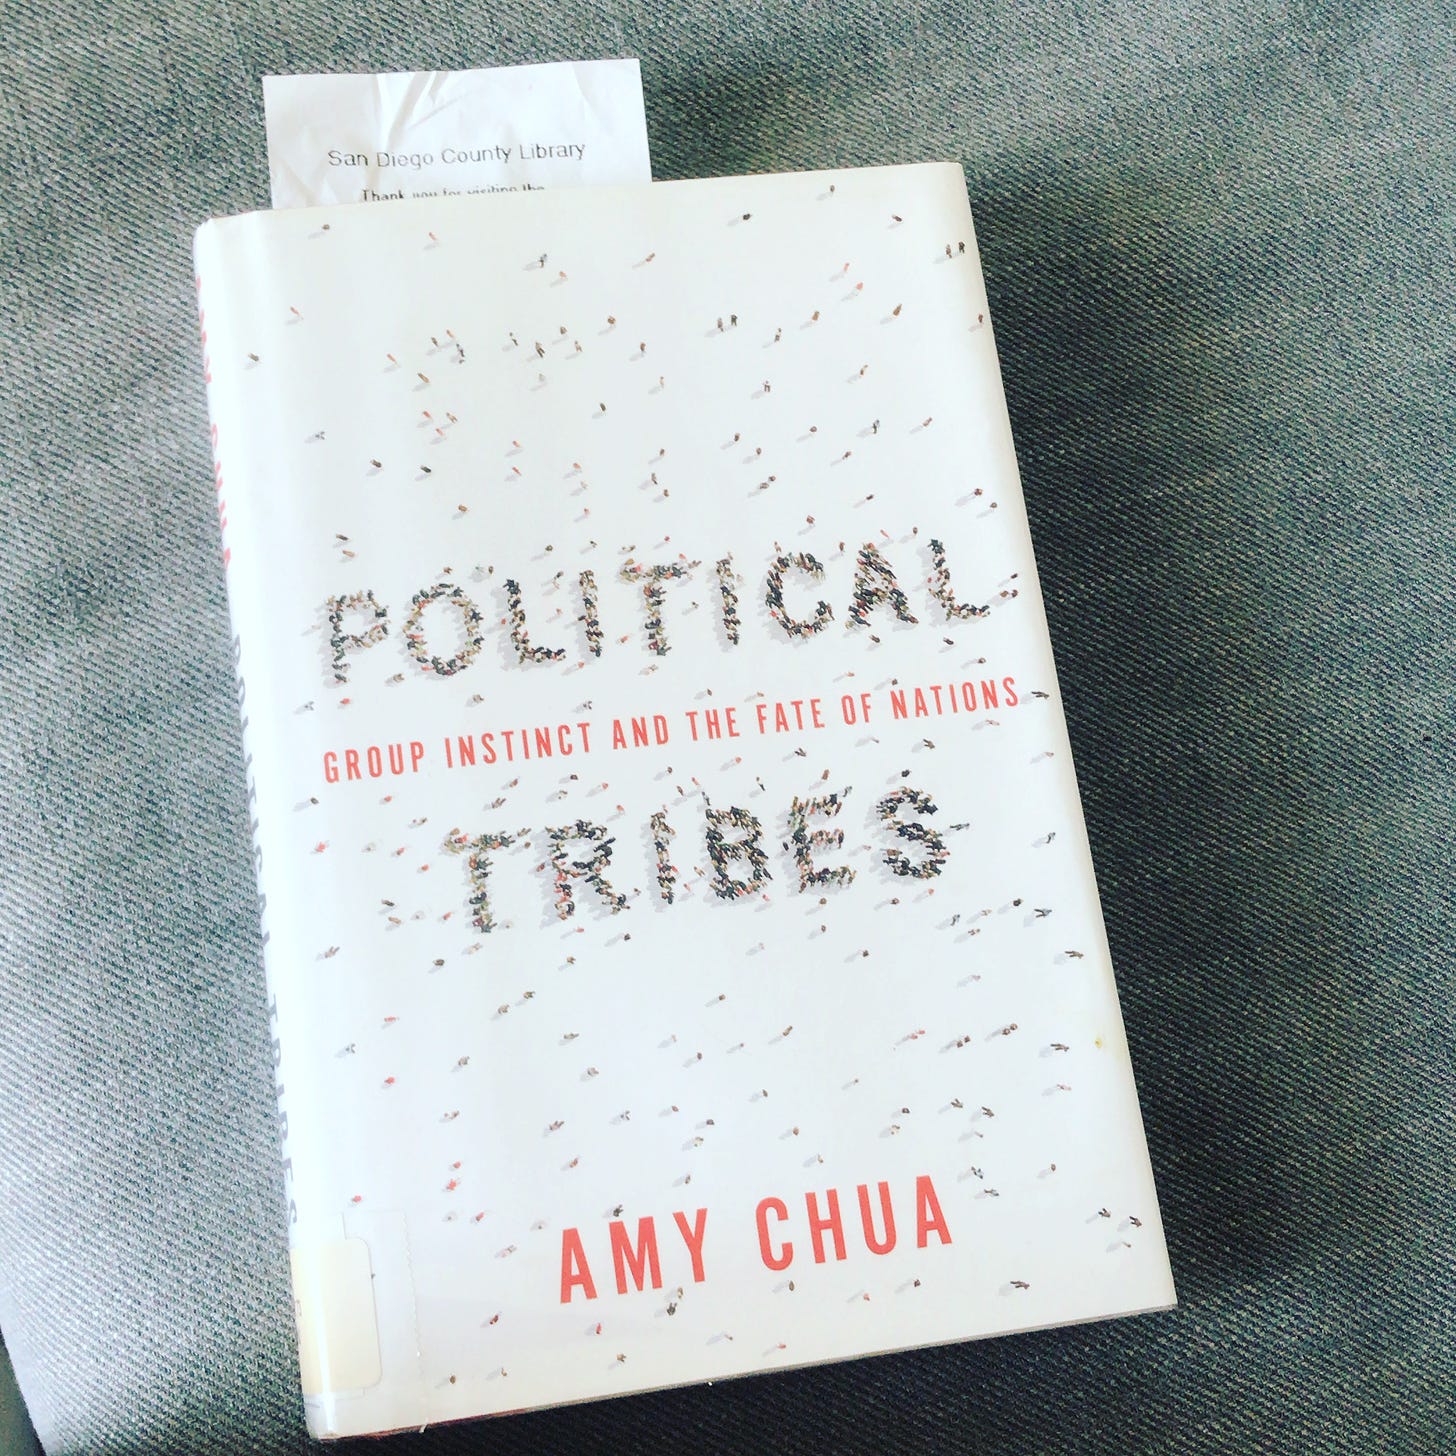 a photo of the book "Political Tribes" by Amy Chua